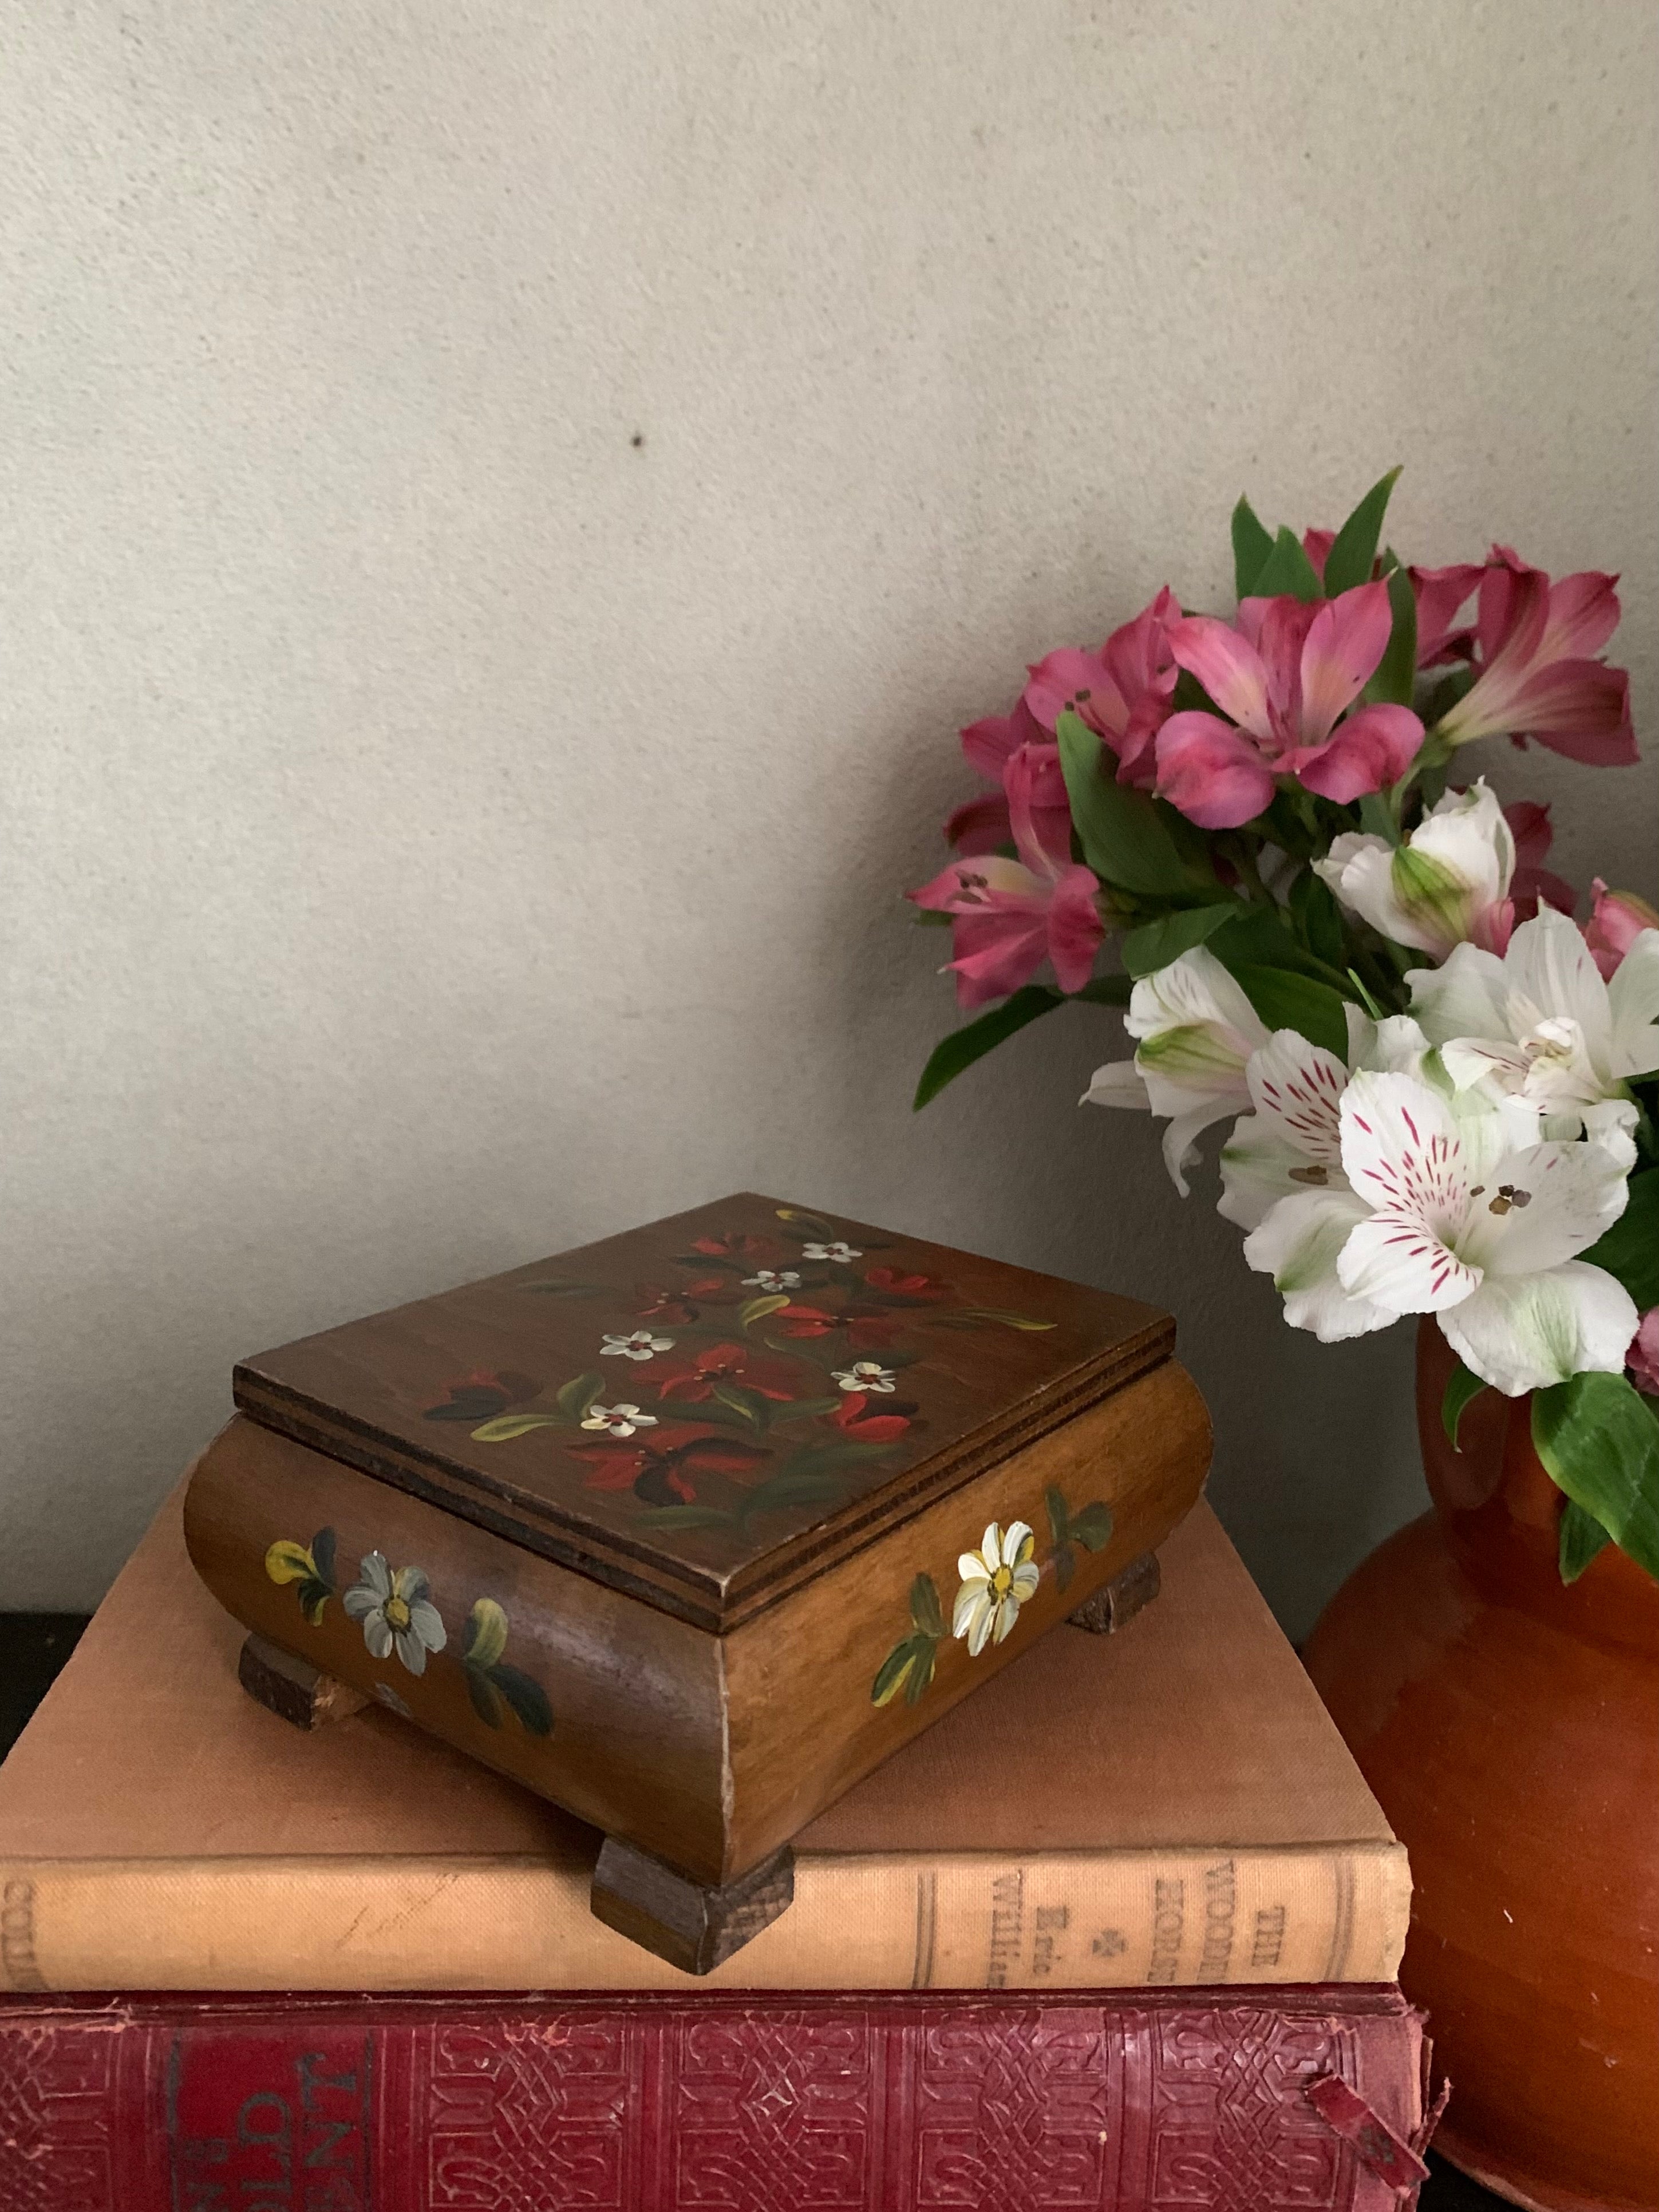 Little hand-painted floral box